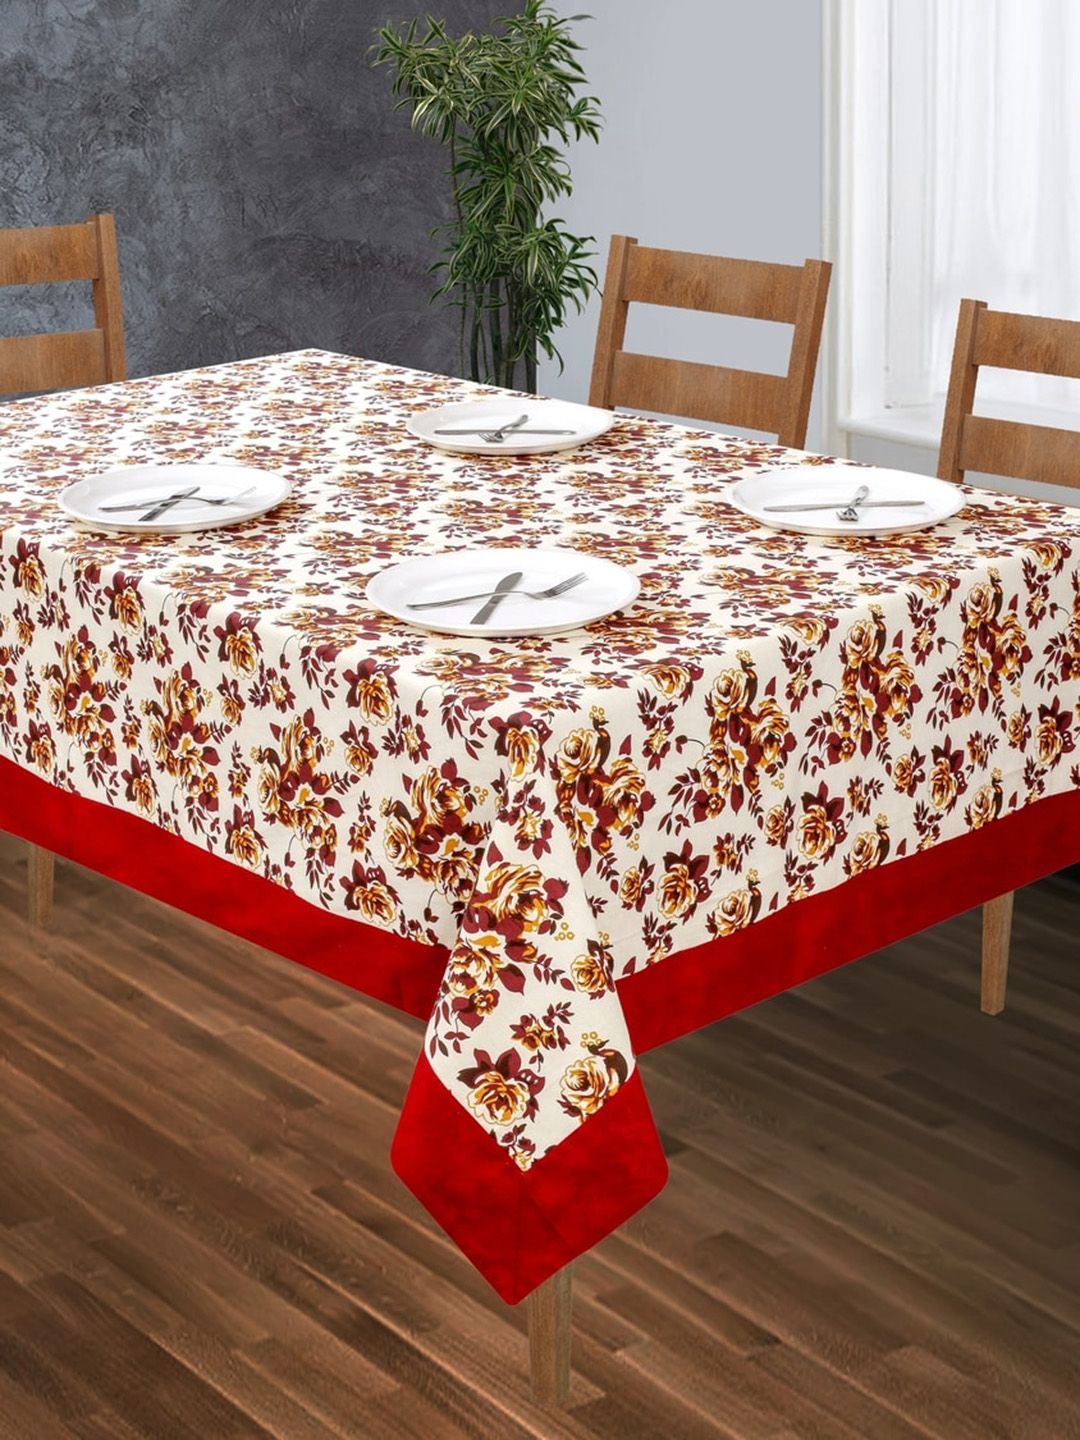 SHADES of LIFE Red & White Printed Cotton 8-Seater Table Cover Price in India